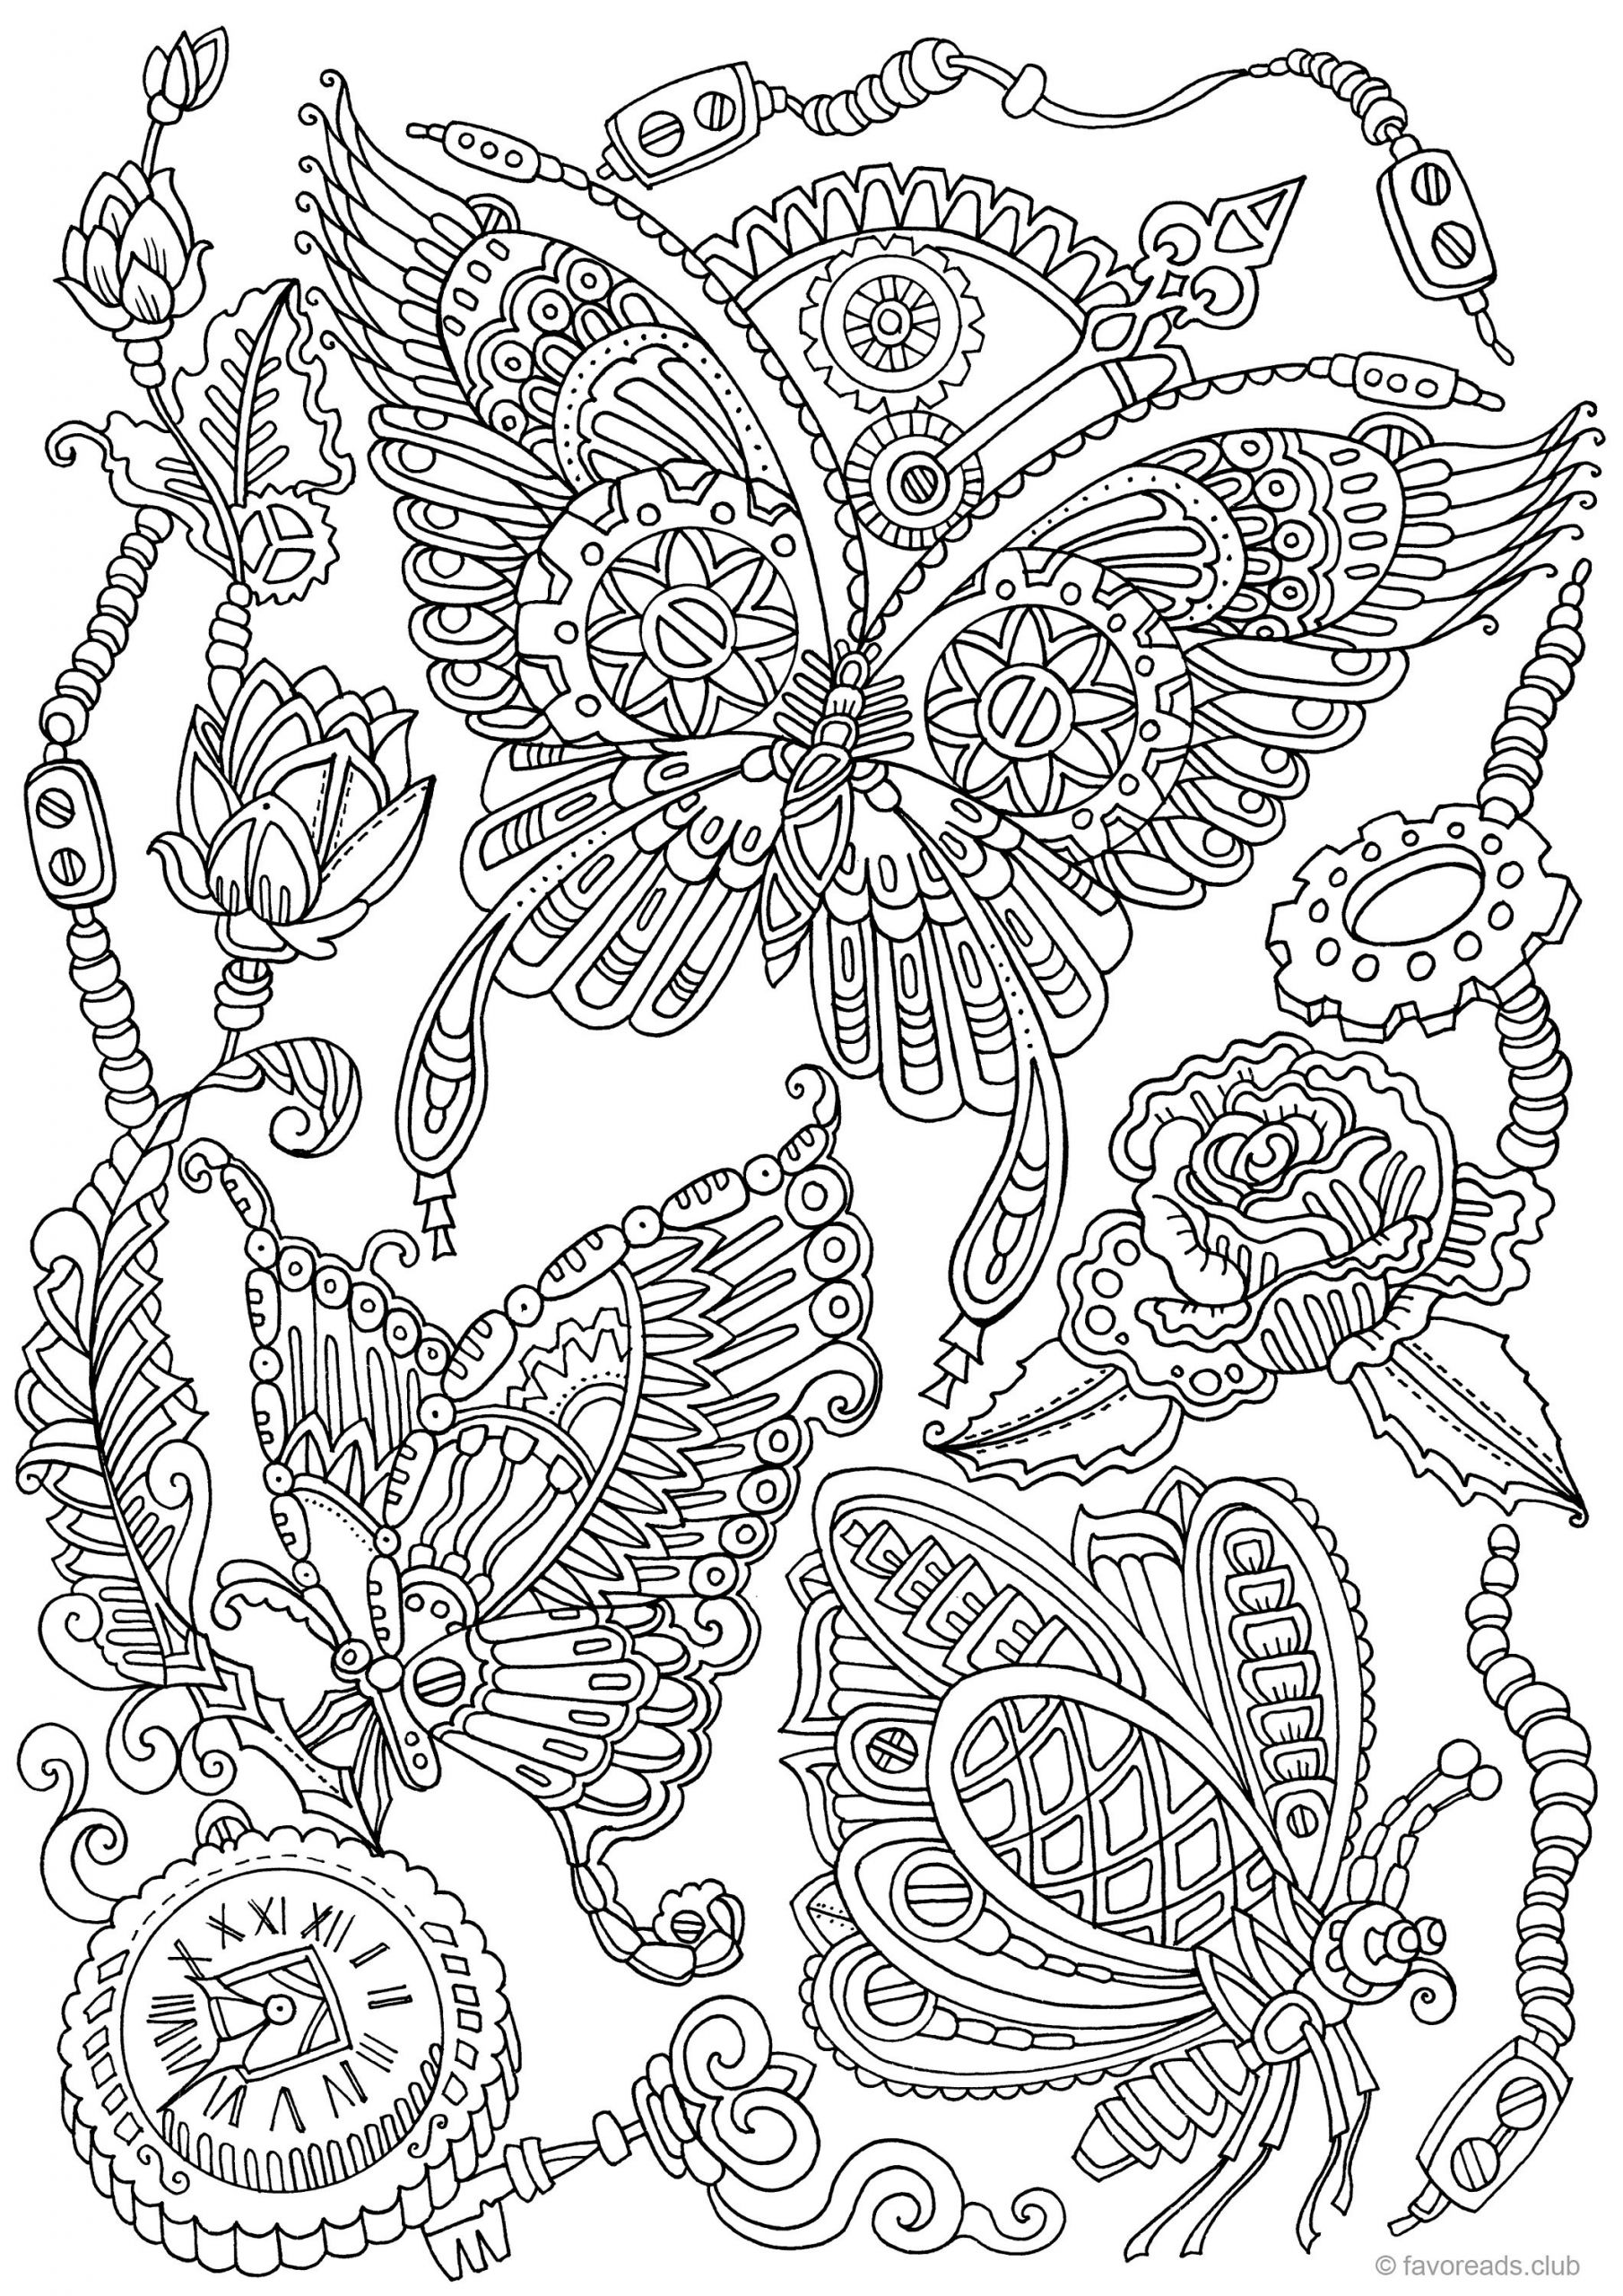 Coloring Pages For Adults To Print
 Steampunk Butterflies Printable Adult Coloring Page from